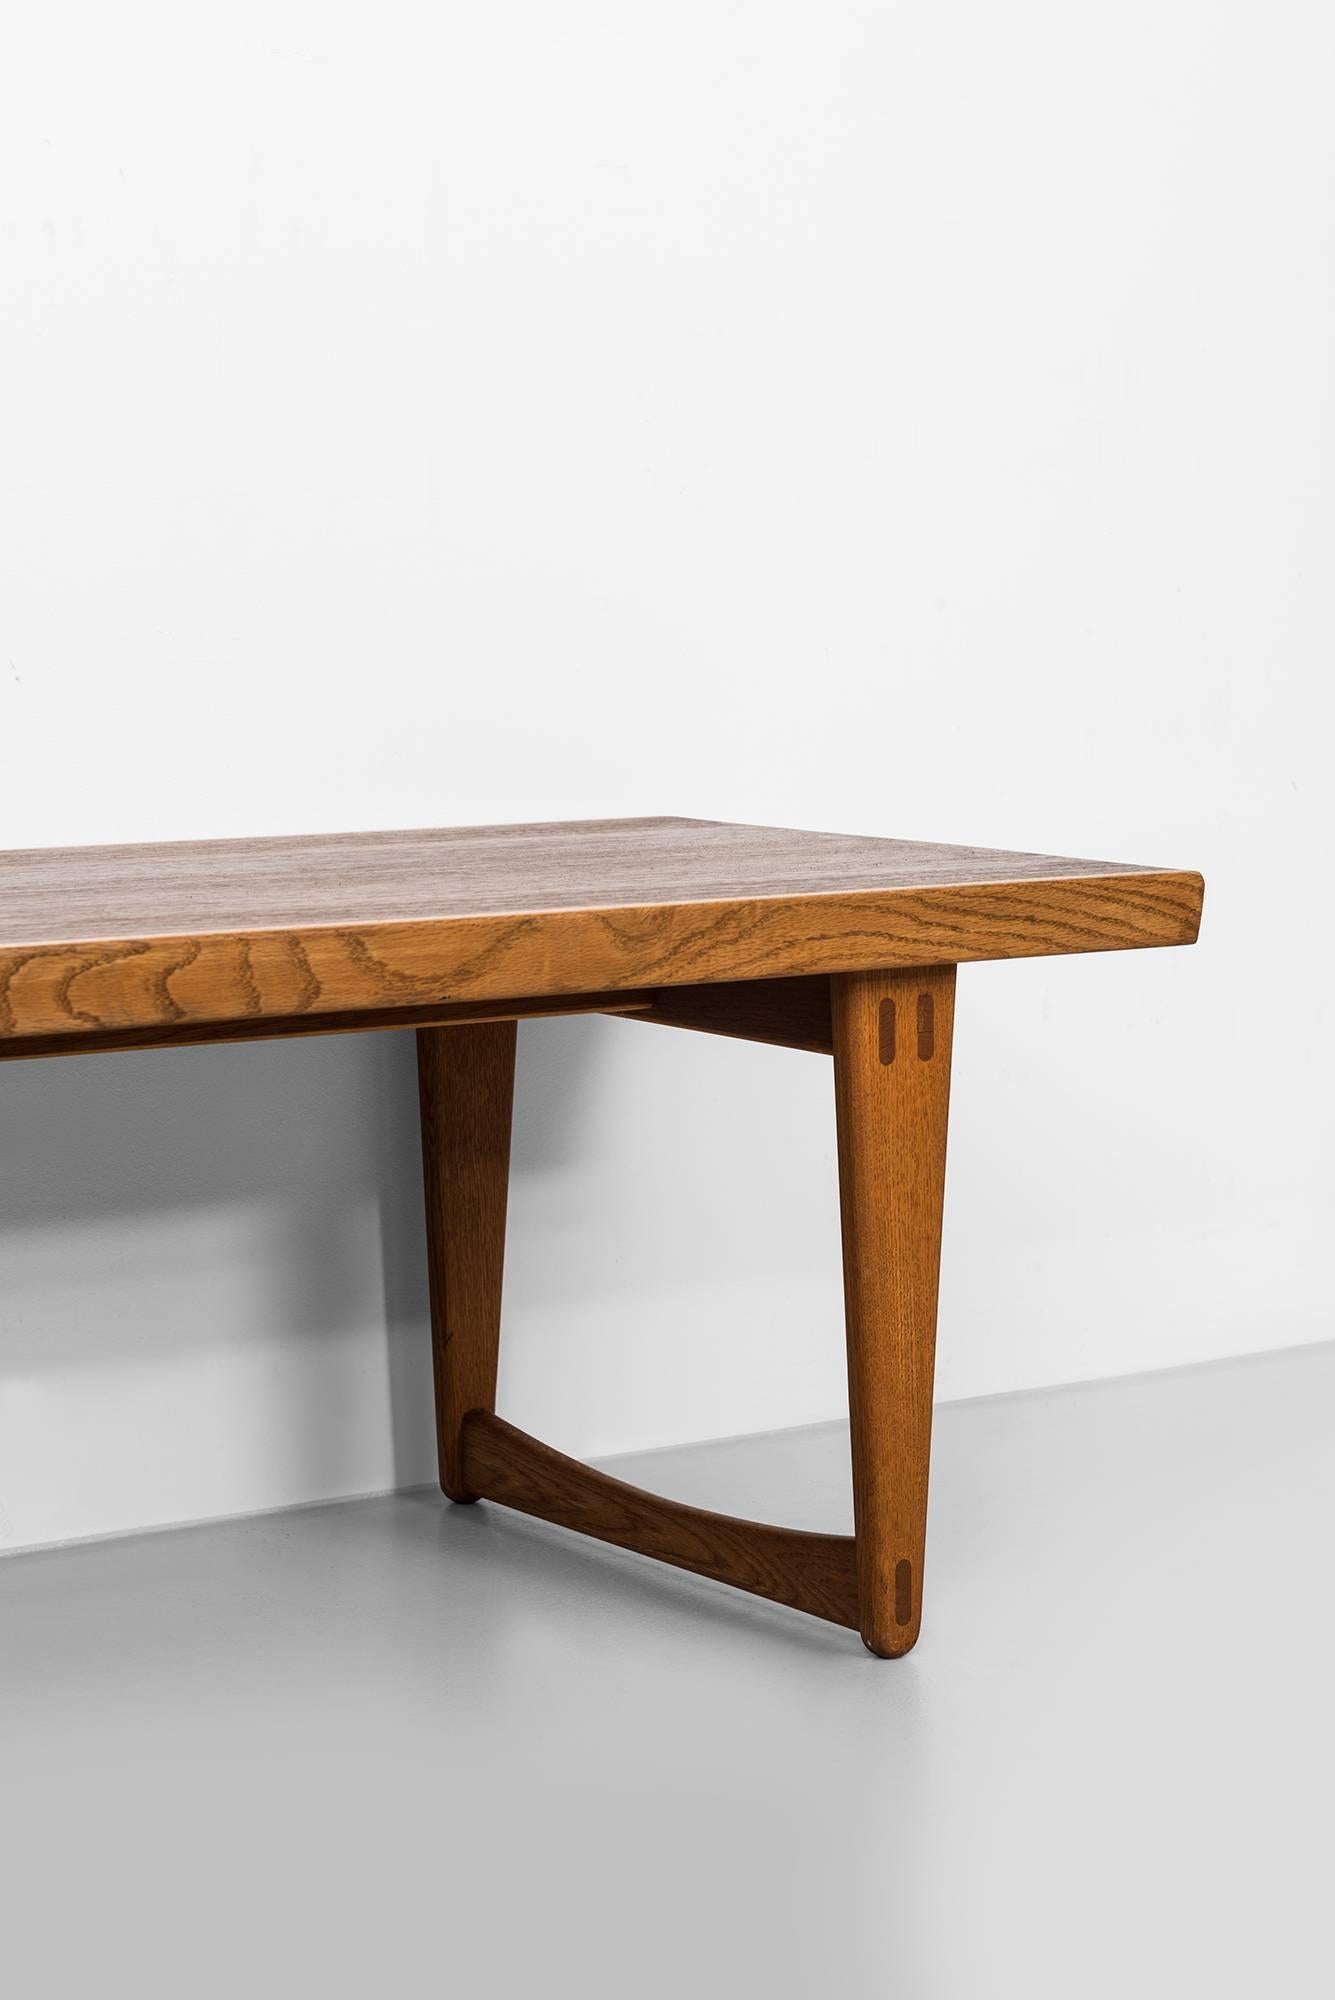 Rare coffee table, side table or bench designed by Yngve Ekström. Produced by Westbergs in Tranås, Sweden.